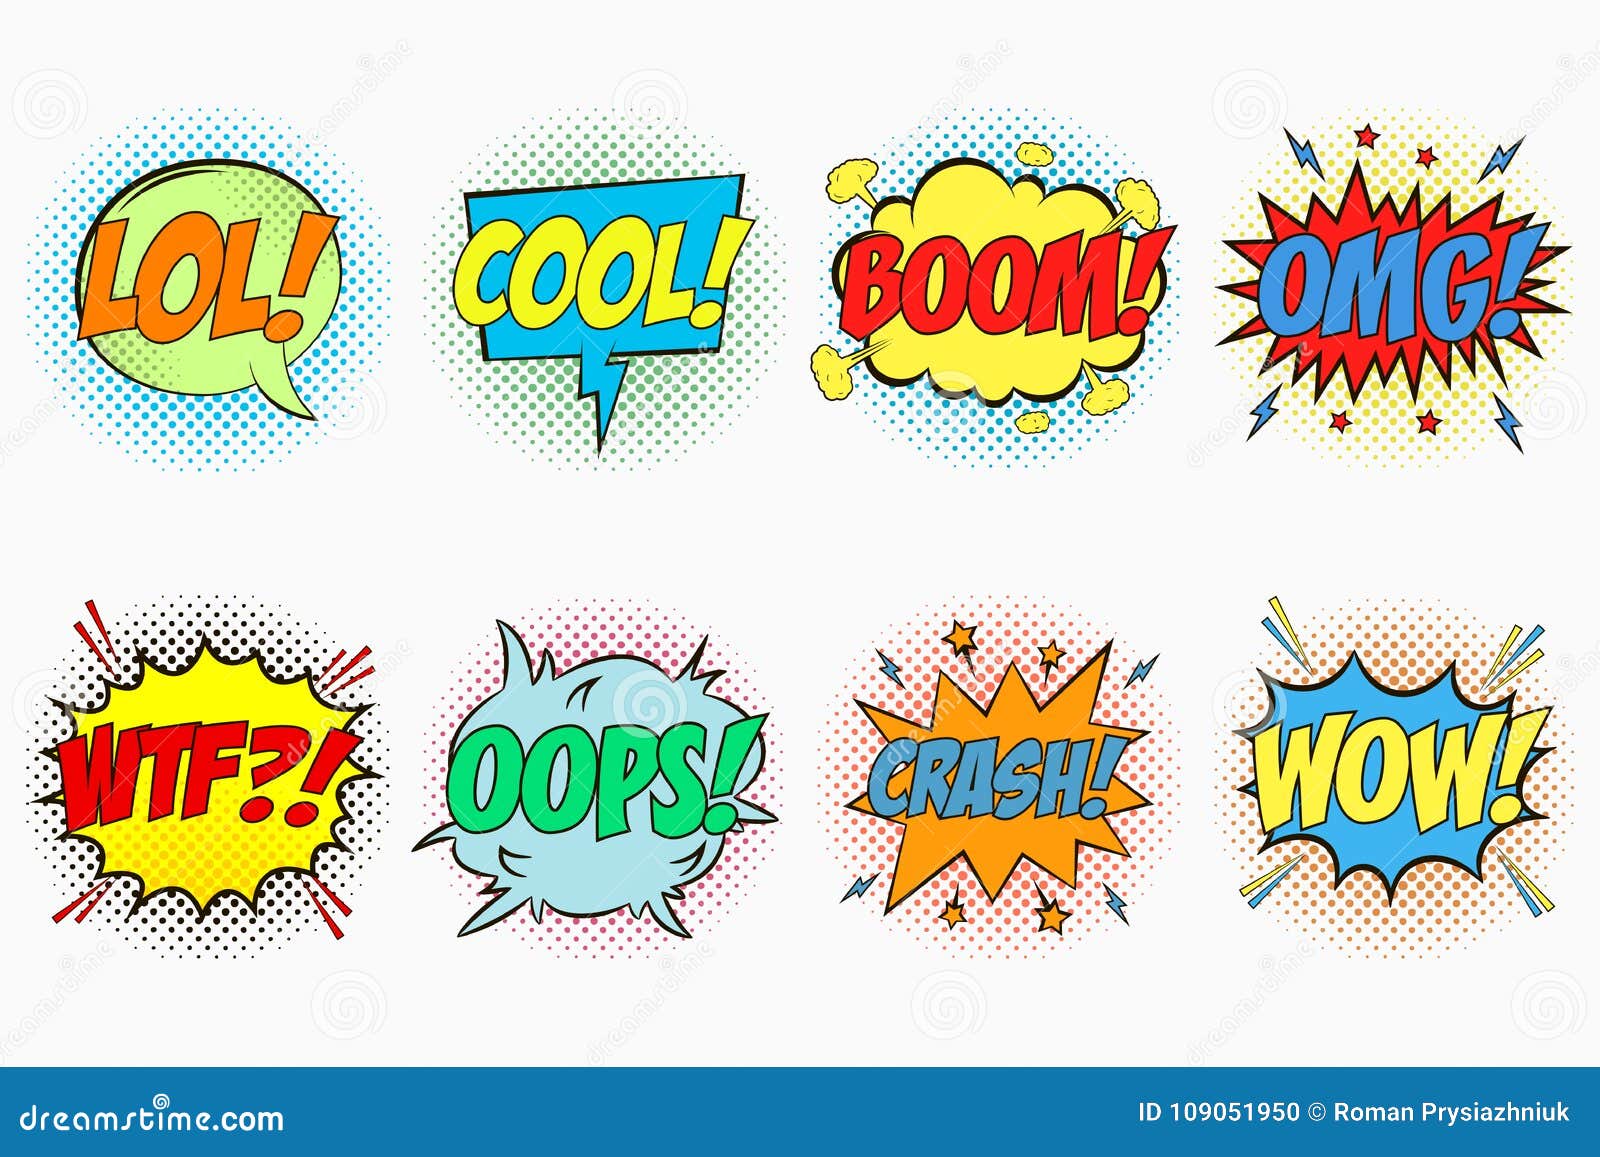 comic speech bubbles set with emotions - lol. cool. boom. omg. wtf. oops. crash. wow. cartoon sketch of dialog effects.